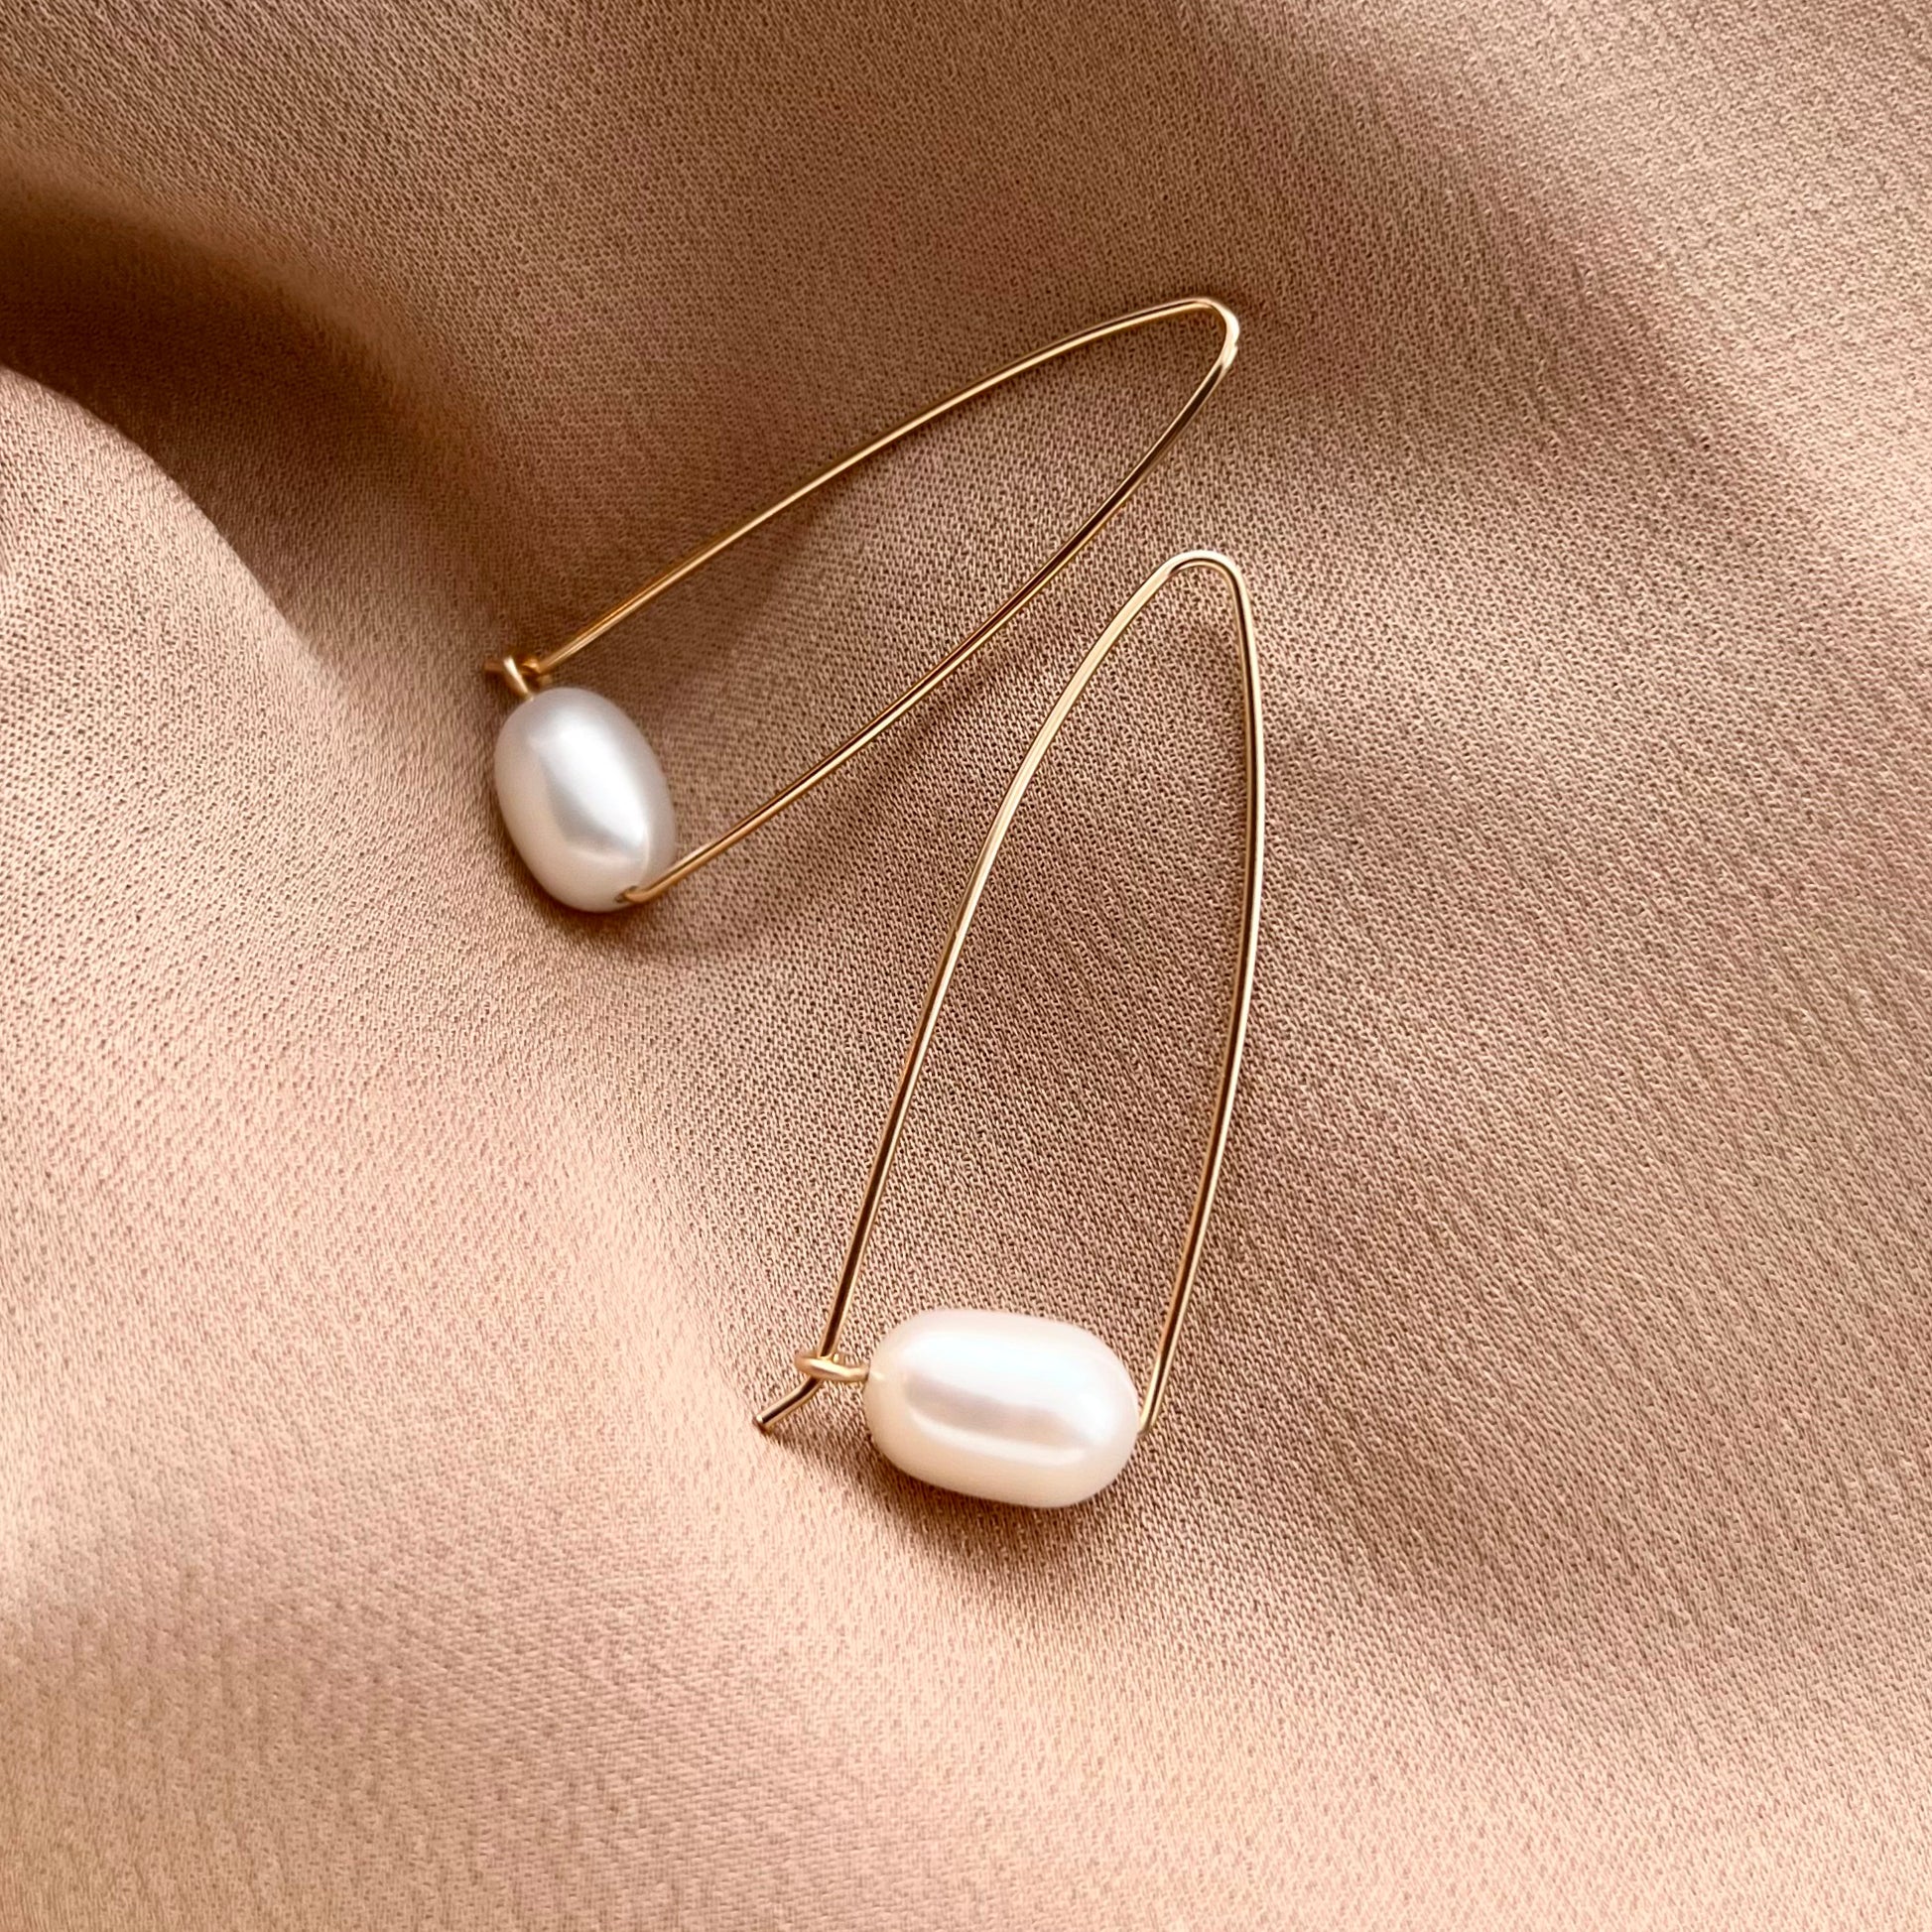 Freshwater Pearl Earring drop is light and easy to wear for everyday. This pearl hoop earring is made with recycled gold.